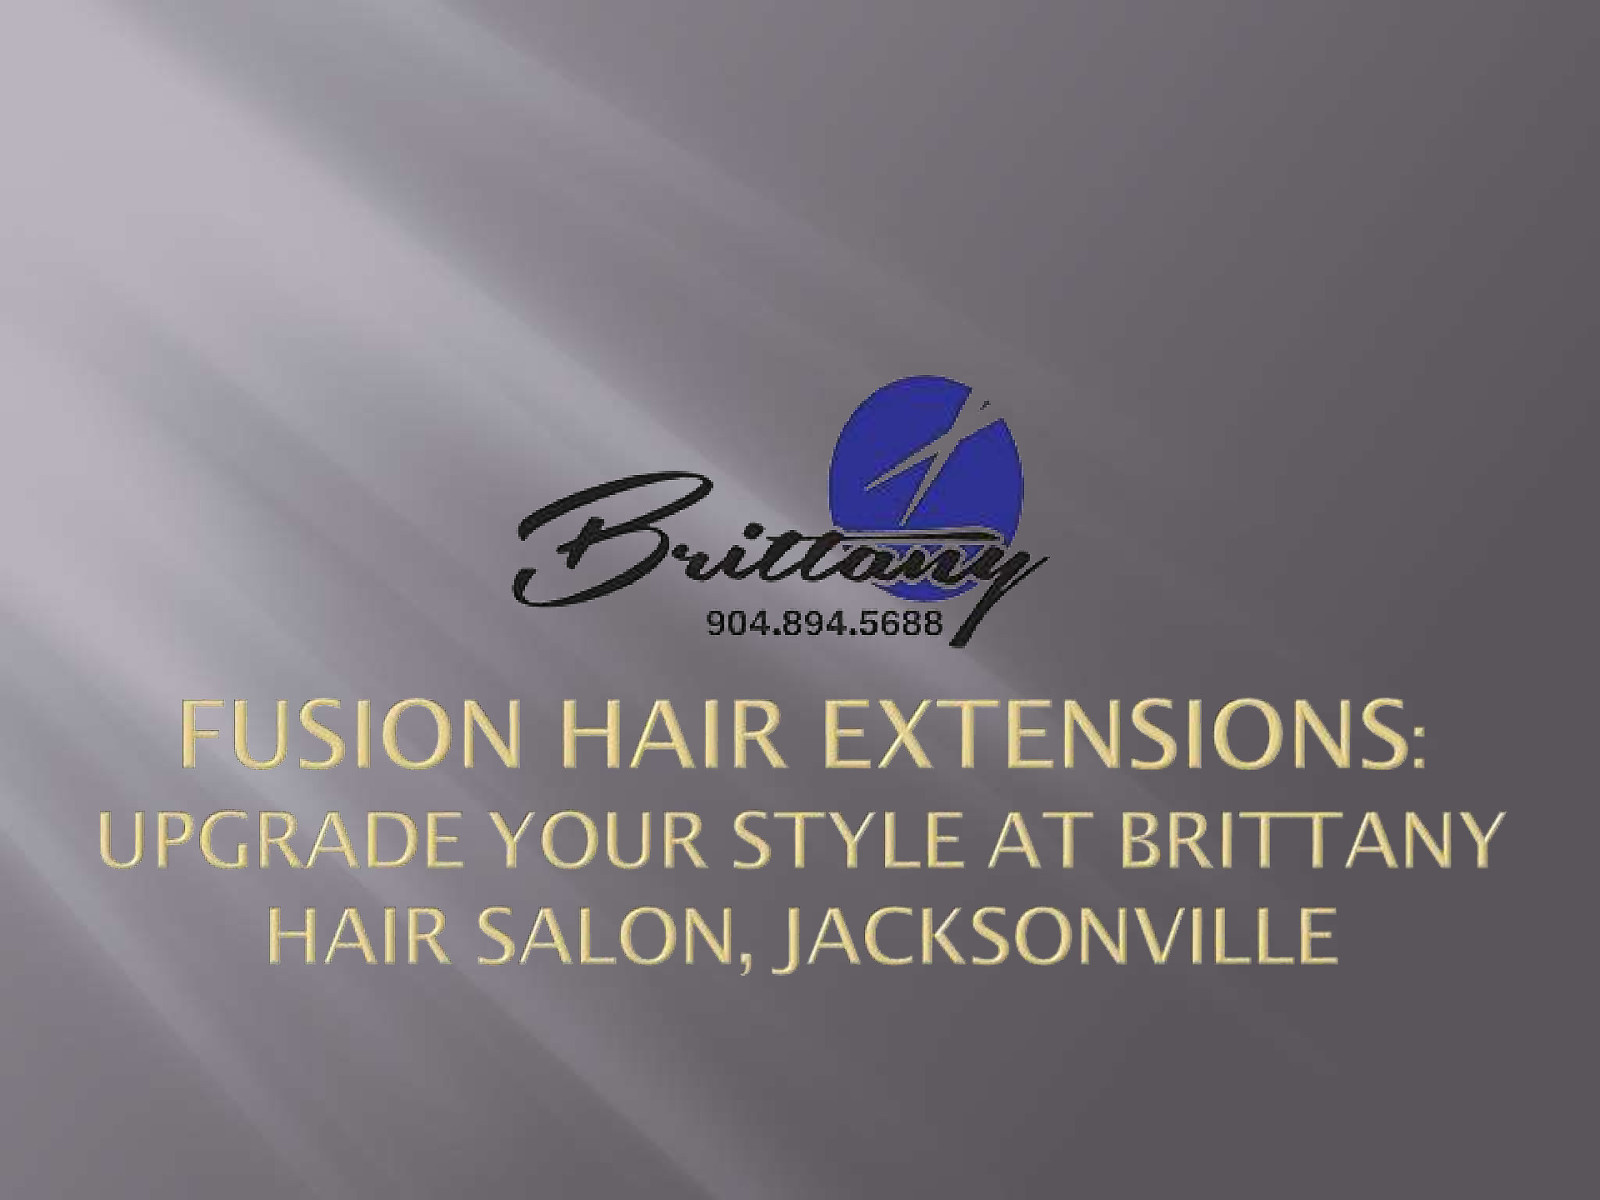 Fusion Hair Extensions Jacksonville -Upgrade Your Hair at Brittany Hair Salon